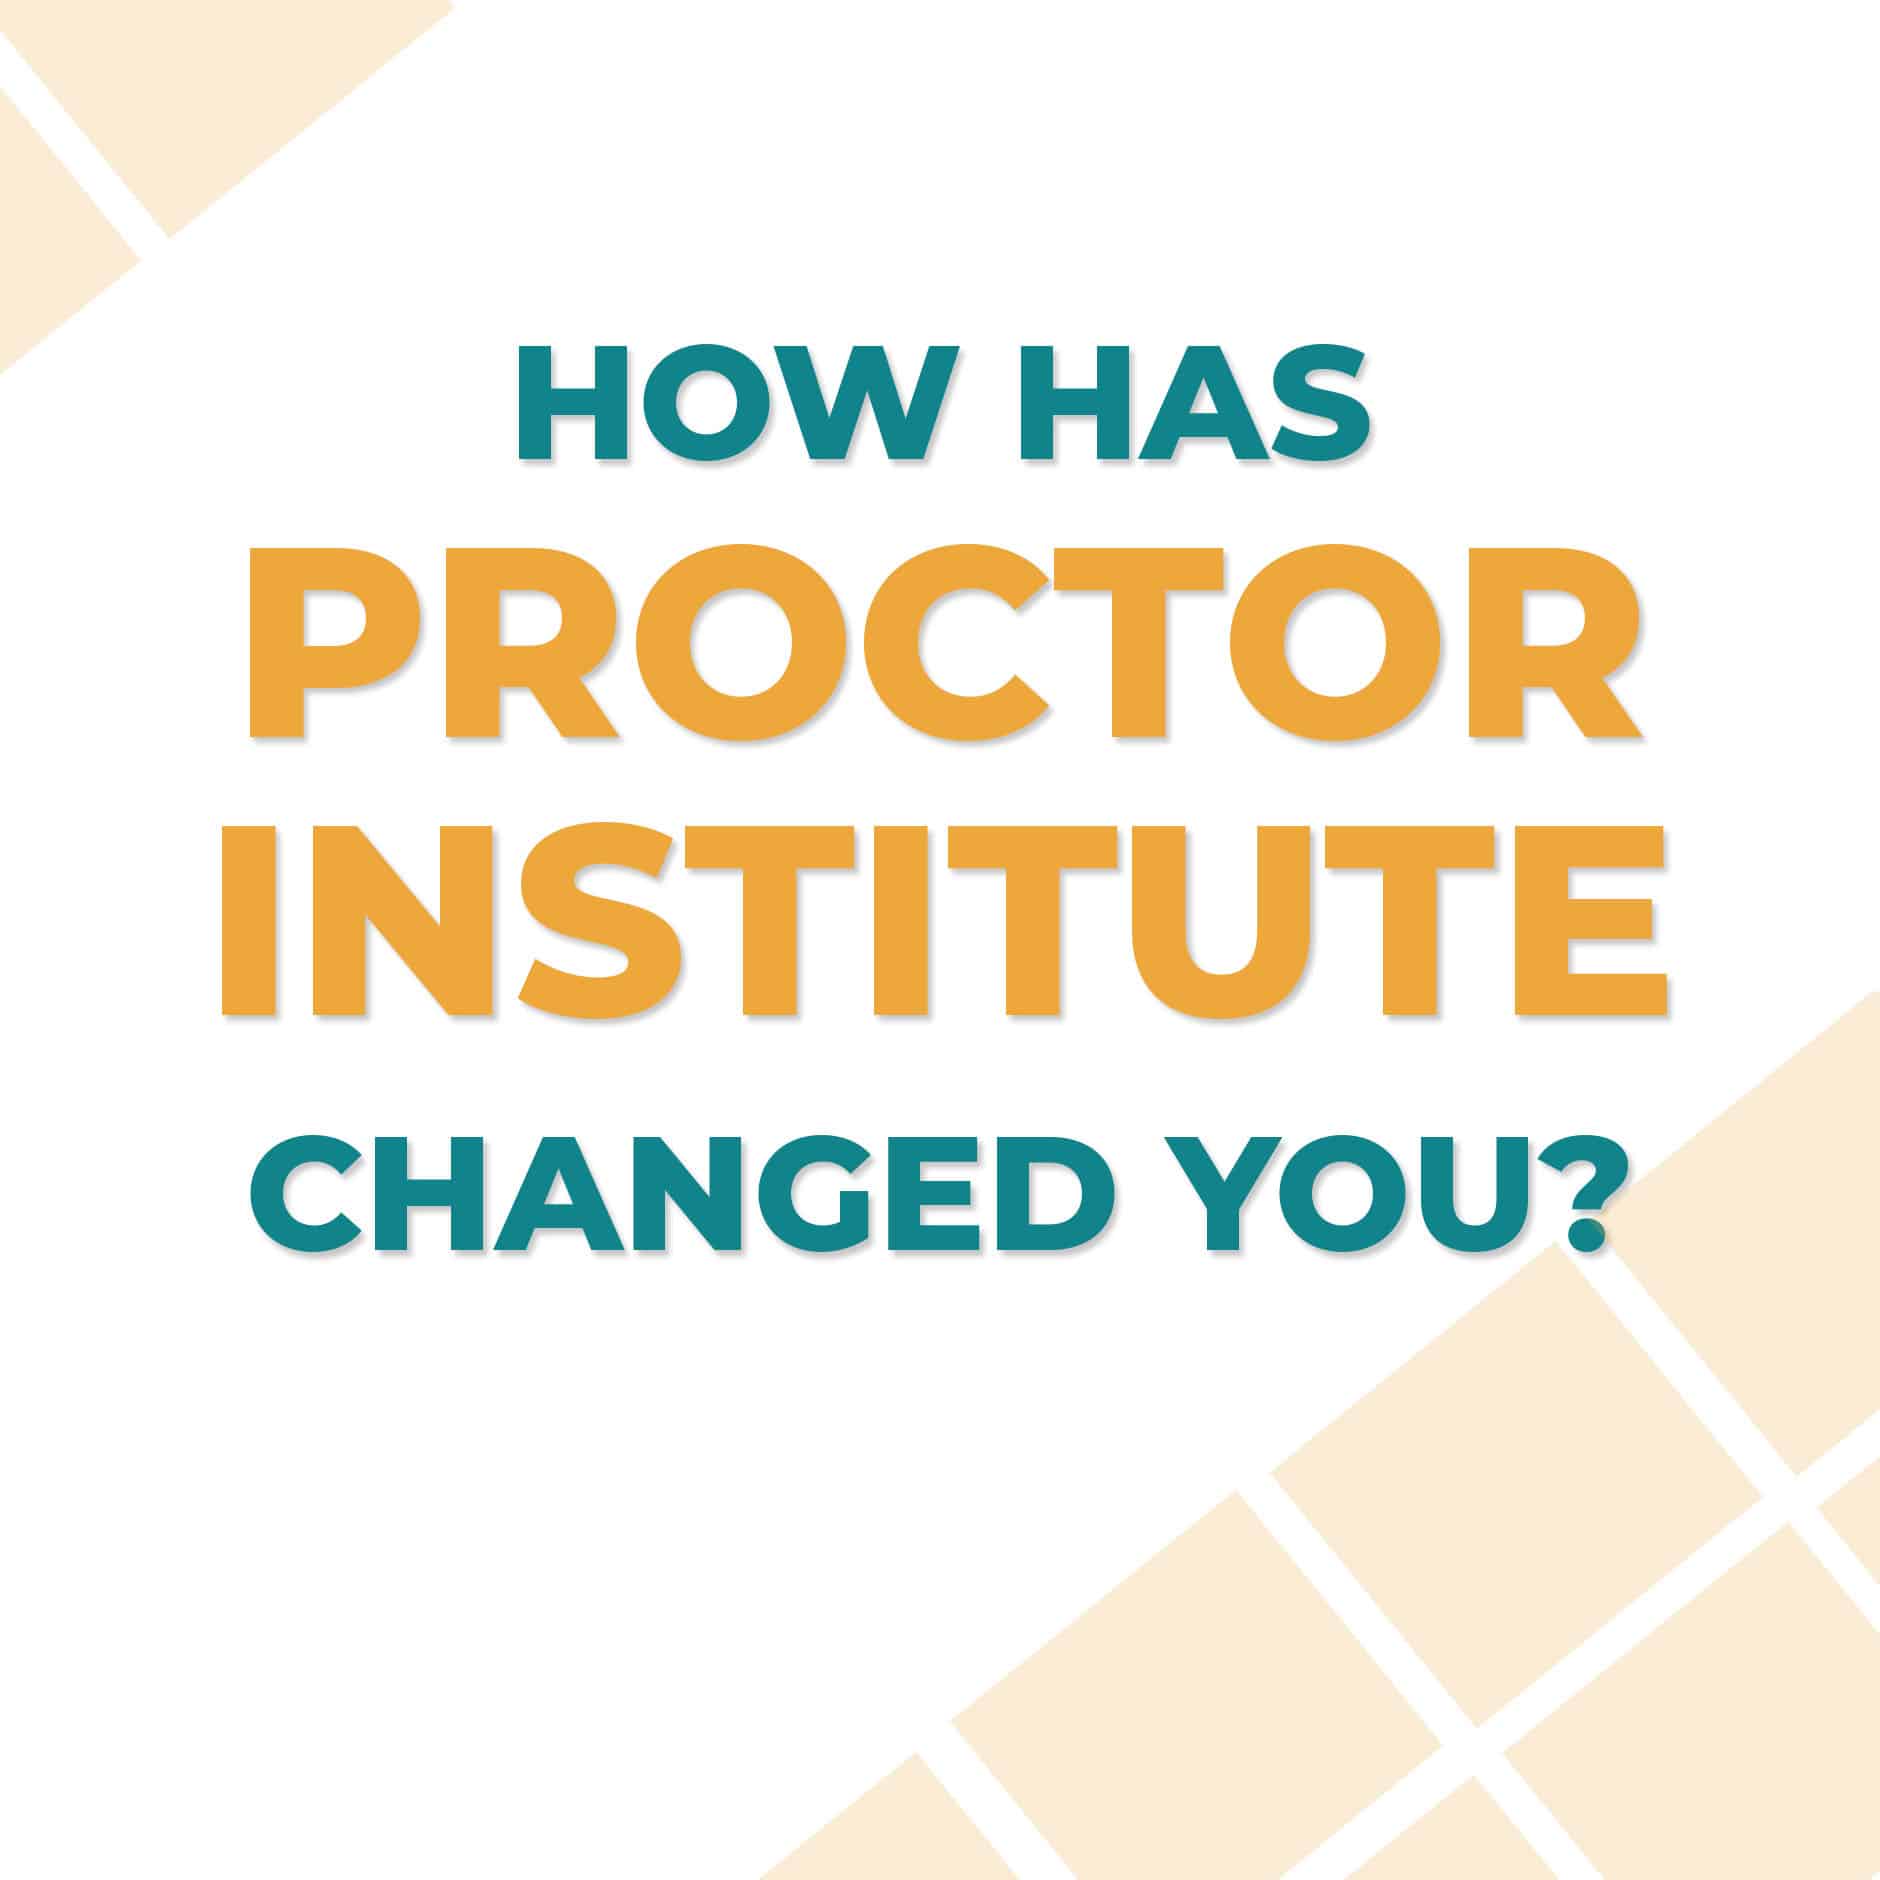 How Has Proctor Institute Changed You?